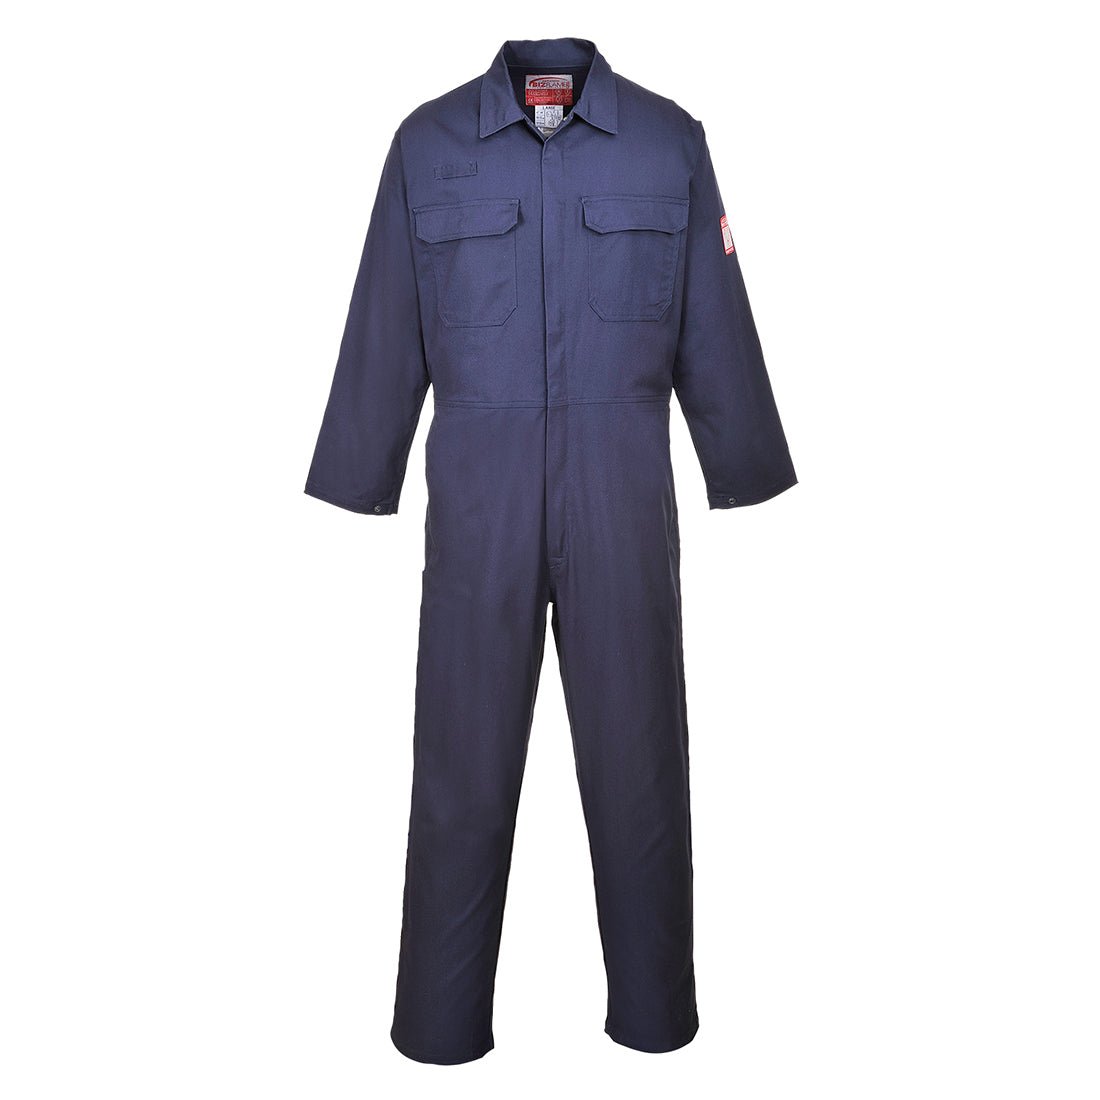 Bizflame Pro Coverall - arbeitskleidung-gmbh